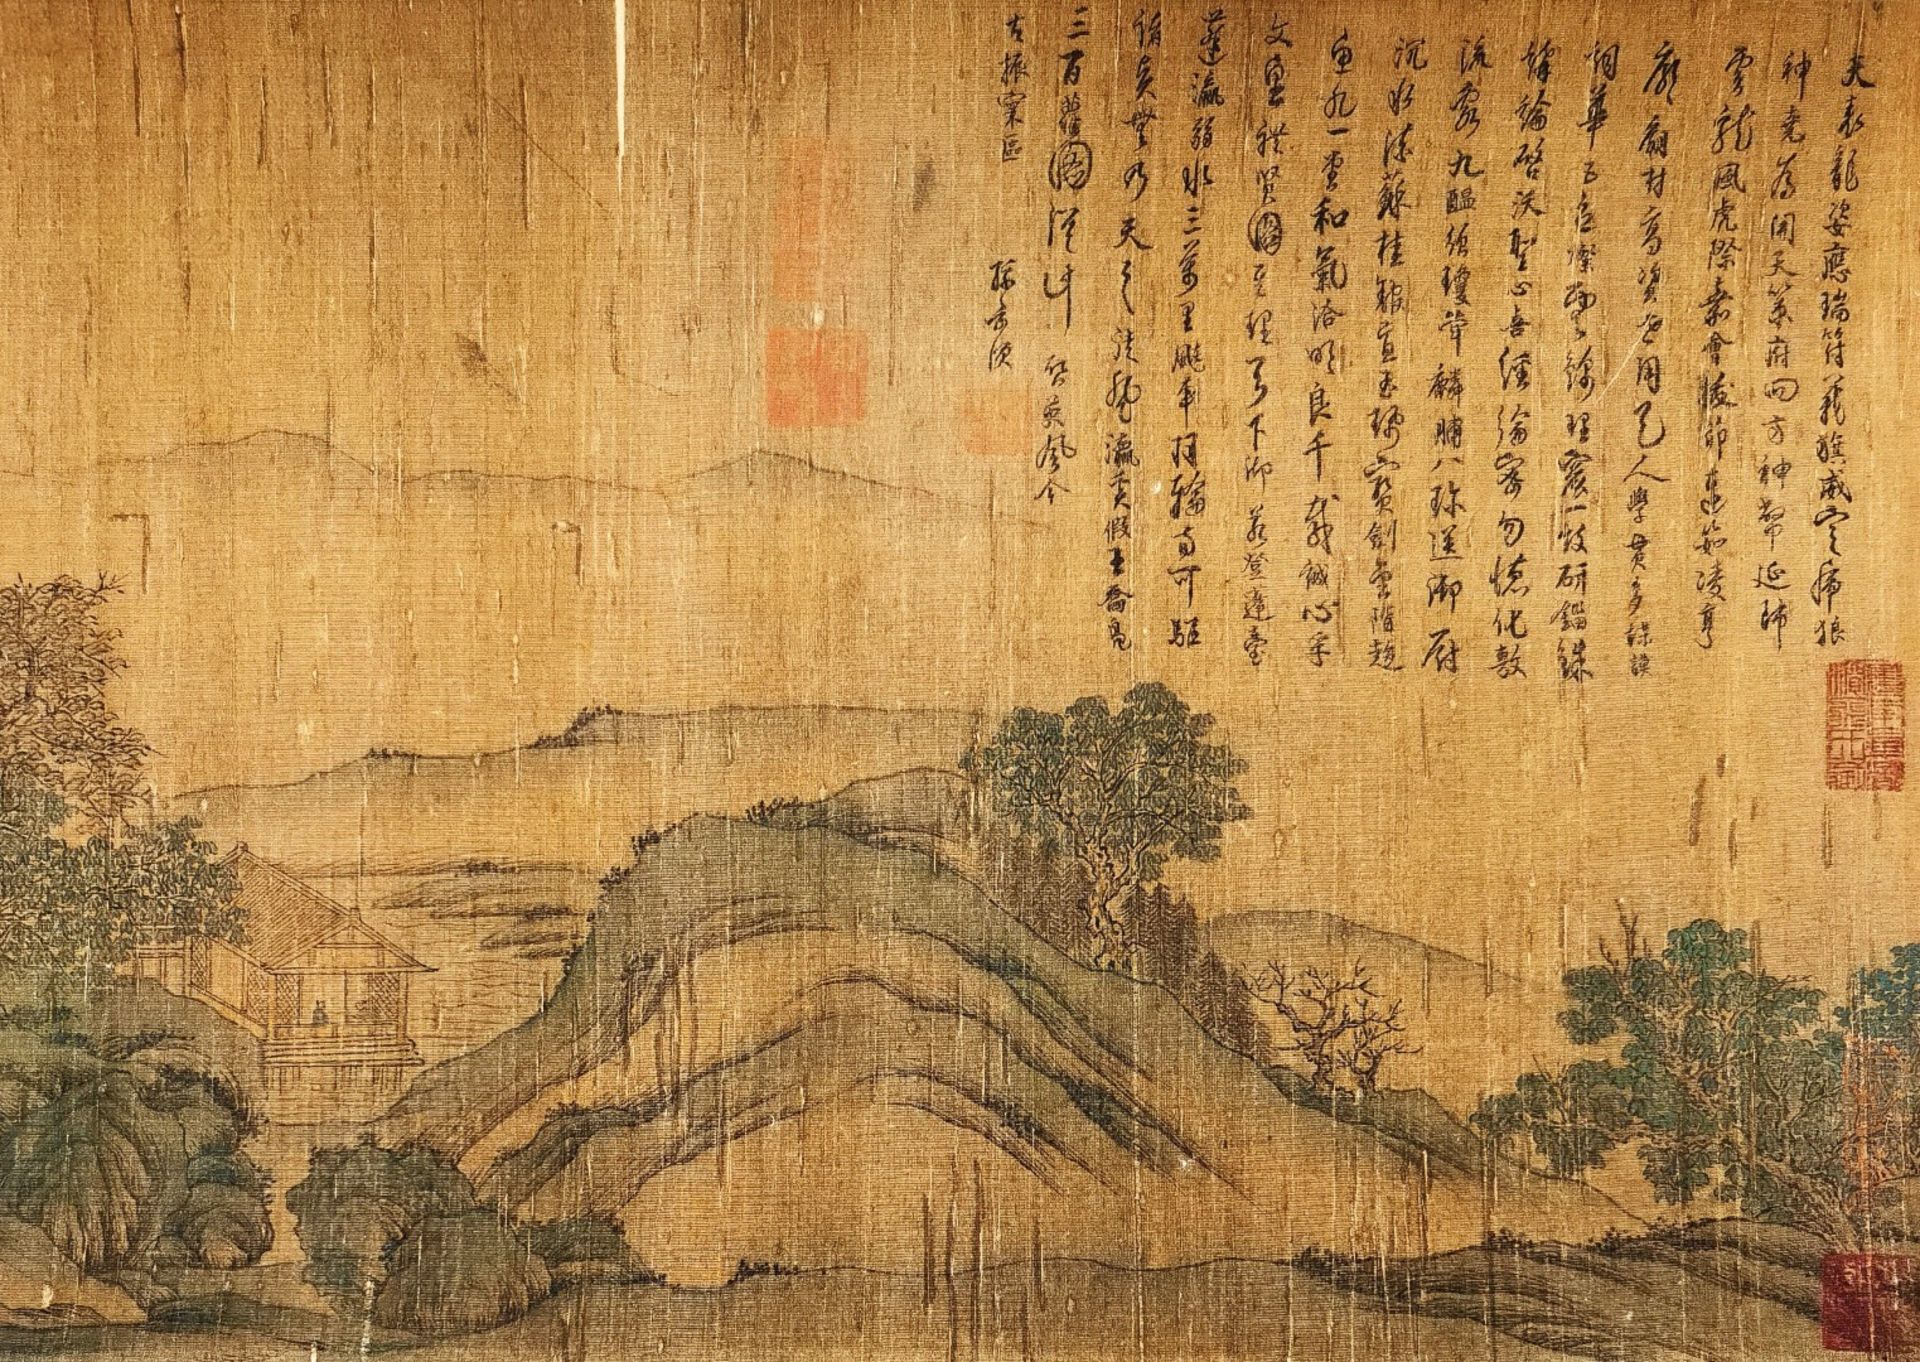 A Chinese Hand Scroll Painting By Tang Yin - Image 2 of 9